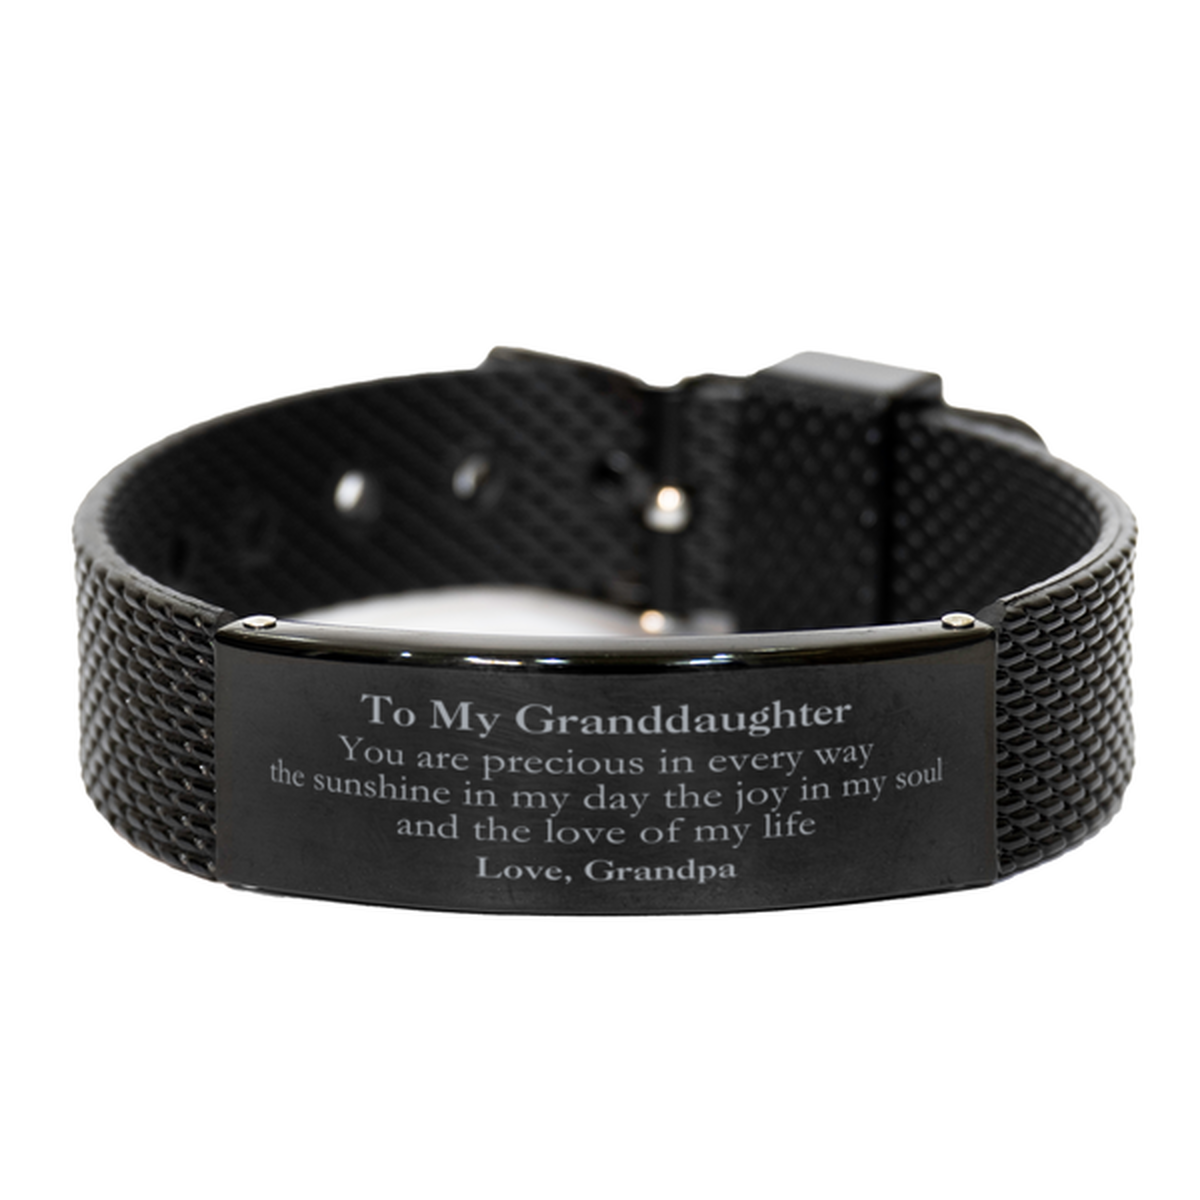 Graduation Gifts for Granddaughter Black Shark Mesh Bracelet Present from Grandpa, Christmas Granddaughter Birthday Gifts Granddaughter You are precious in every way the sunshine in my day. Love, Grandpa